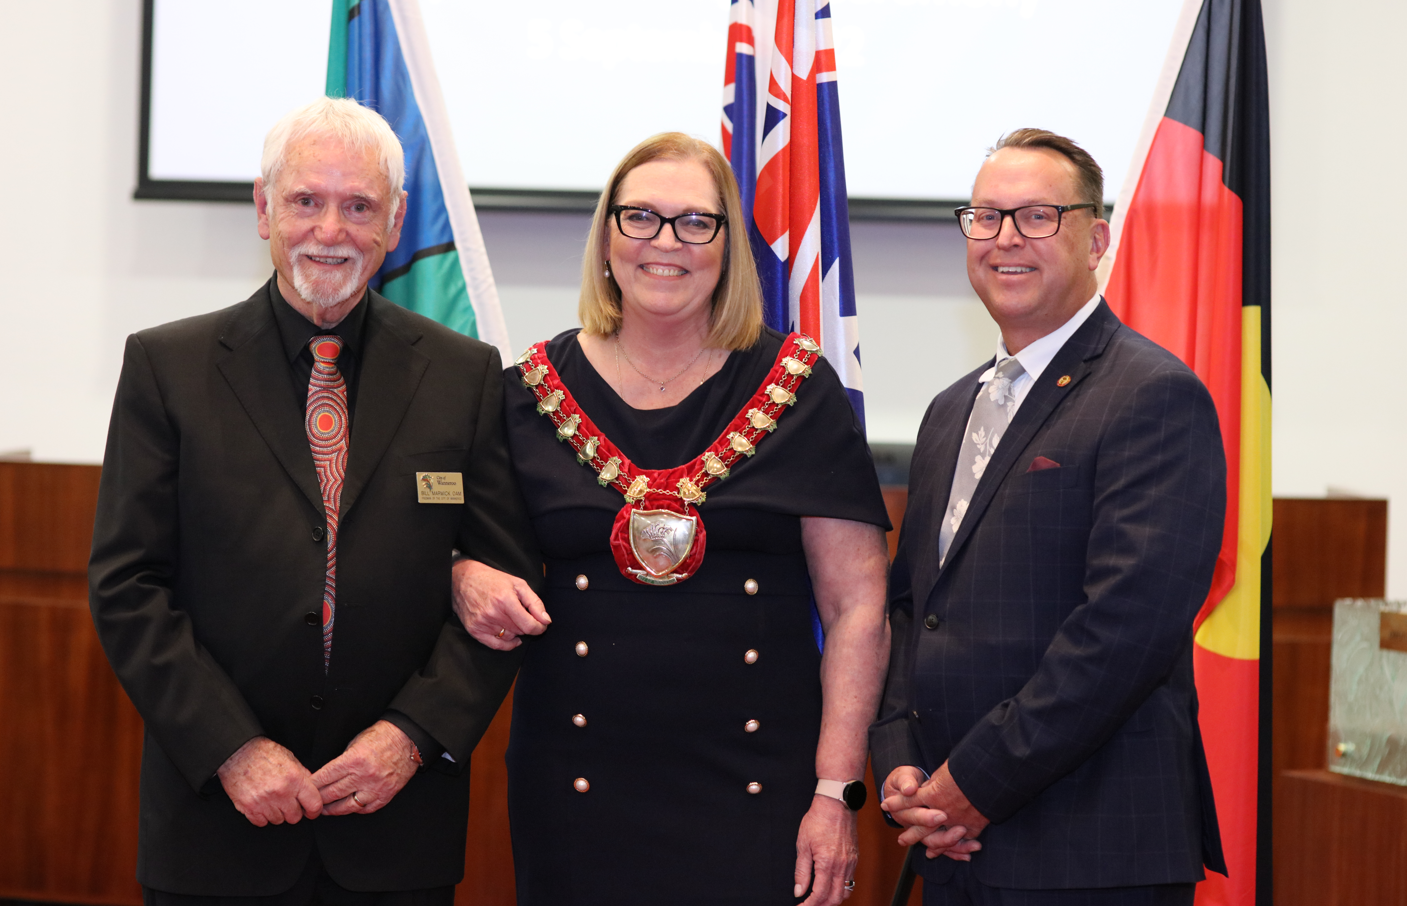 Freeman of the City Bill Marwick OAM, Mayor Linda Aitken and City of Wanneroo CEO Daniel Simms stand side by side for a photo in the Council Chambers